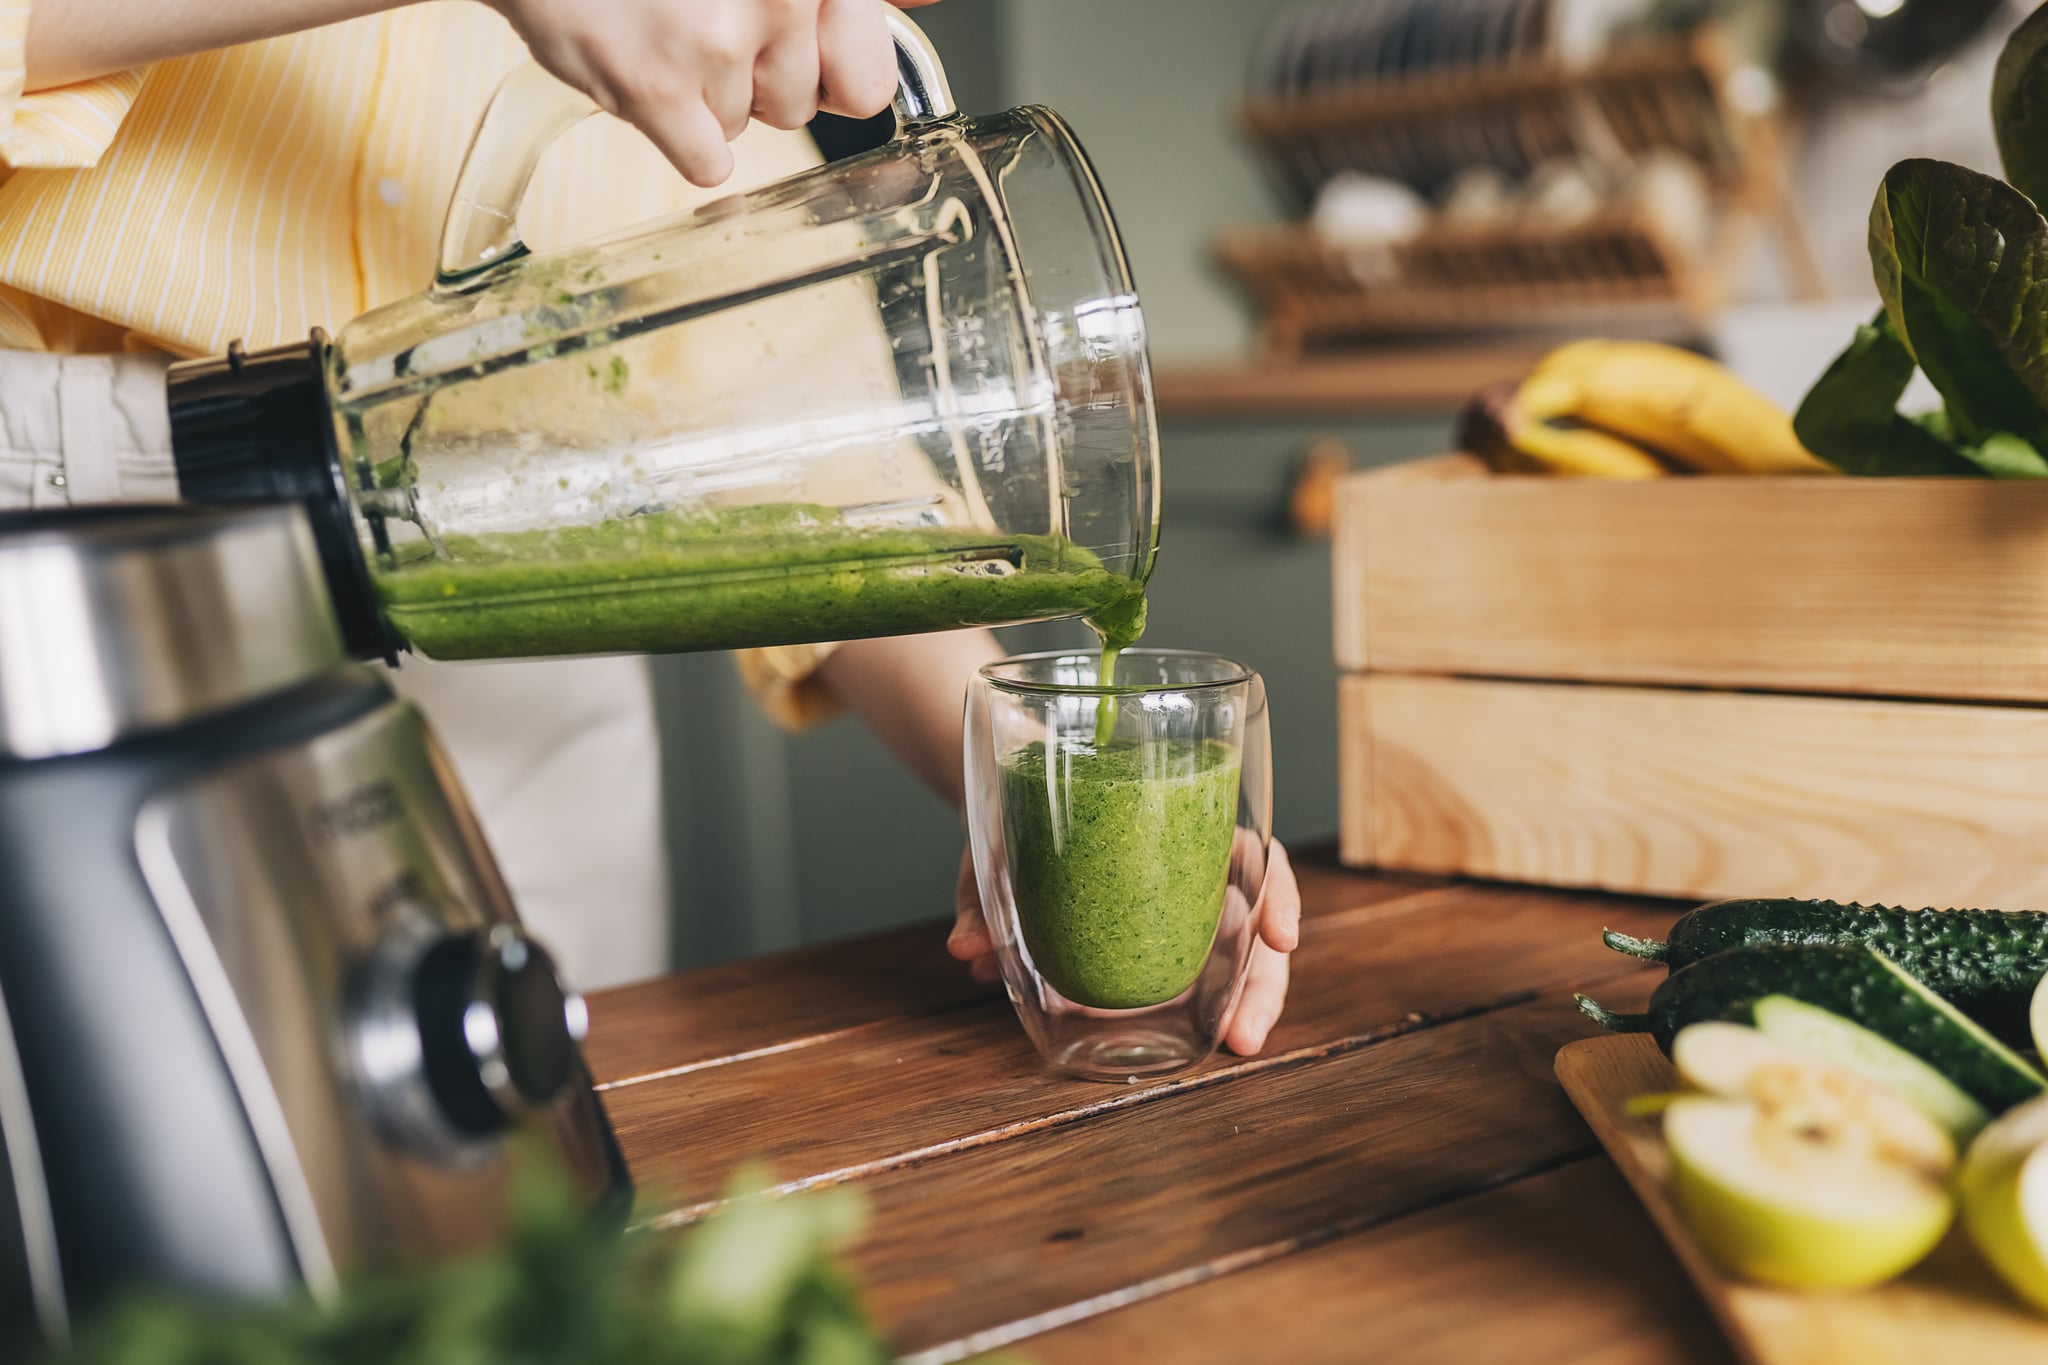 person pouring green smoothie from blender into glass: are smoothies healthy?